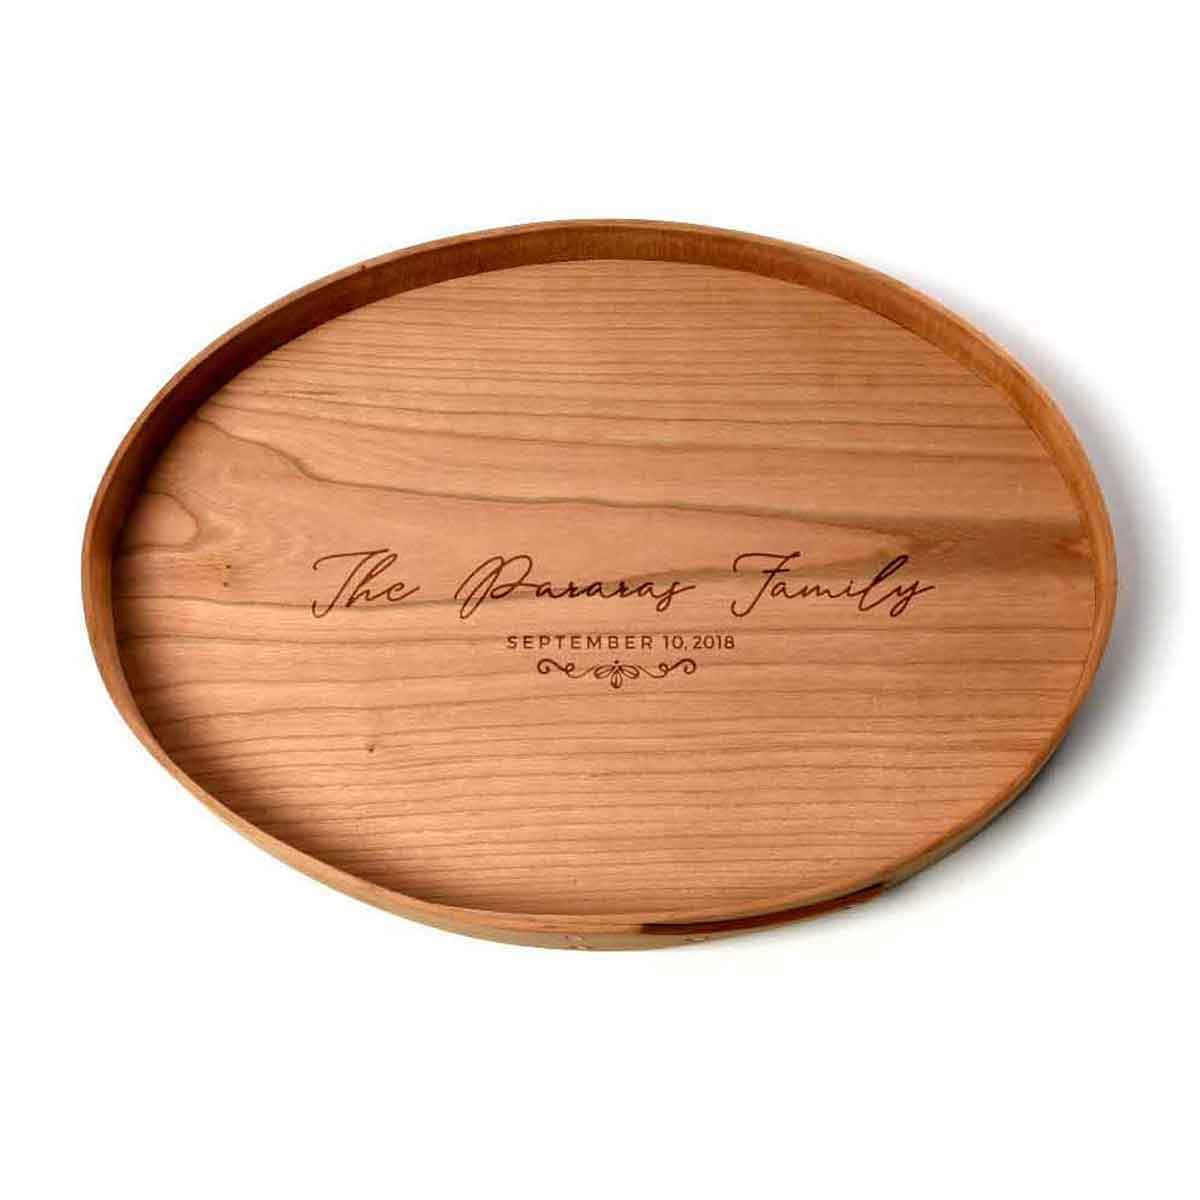 Shaker style wood tray, decorated for easter